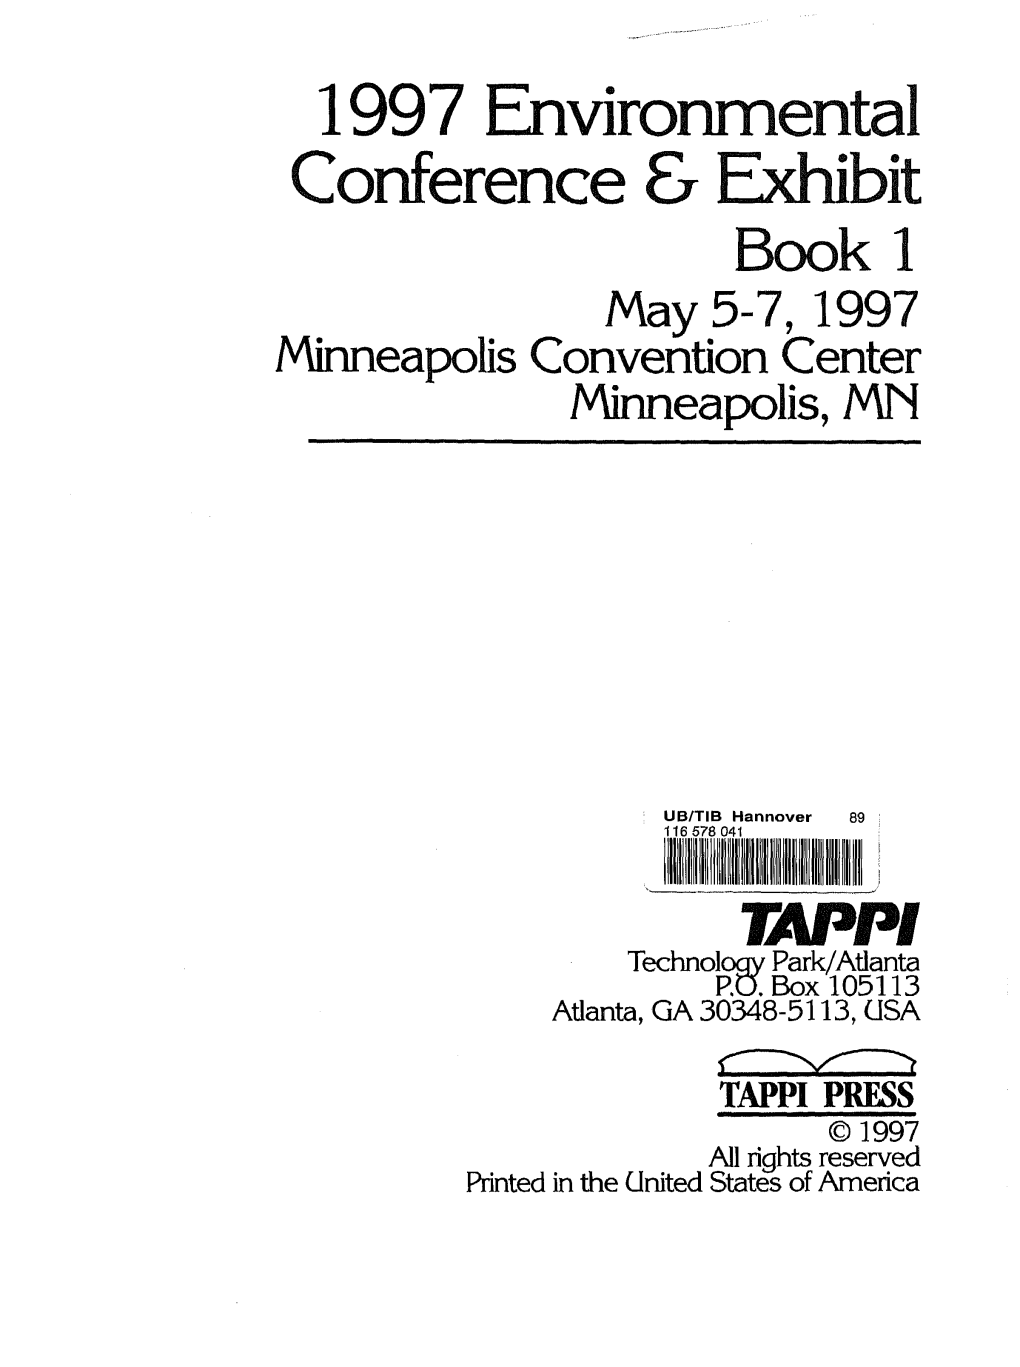 1997 Environmental Conference & Exhibit Book 1 May 5-7, 1997 Minneapolis Convention Center Minneapolis, MN